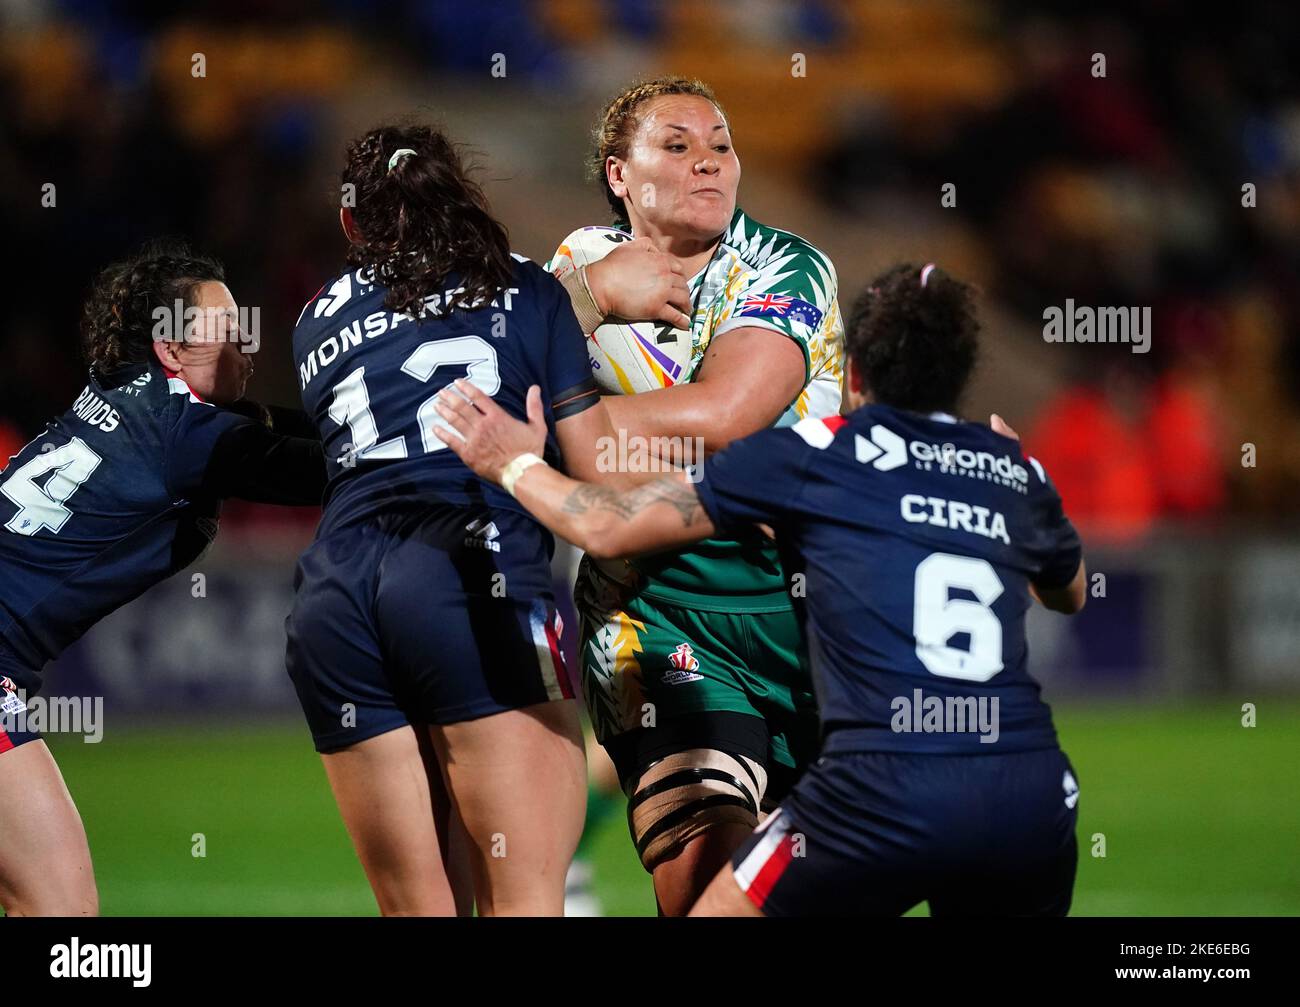 Cook Islands' Elianna Walton tackled by France's Fanny Ramos, Perinne Monsarrat and Elisa Ciria during the Women's Rugby League World Cup Group B match at the LNER Community Stadium, York. Picture date: Thursday November 10, 2022. Stock Photo